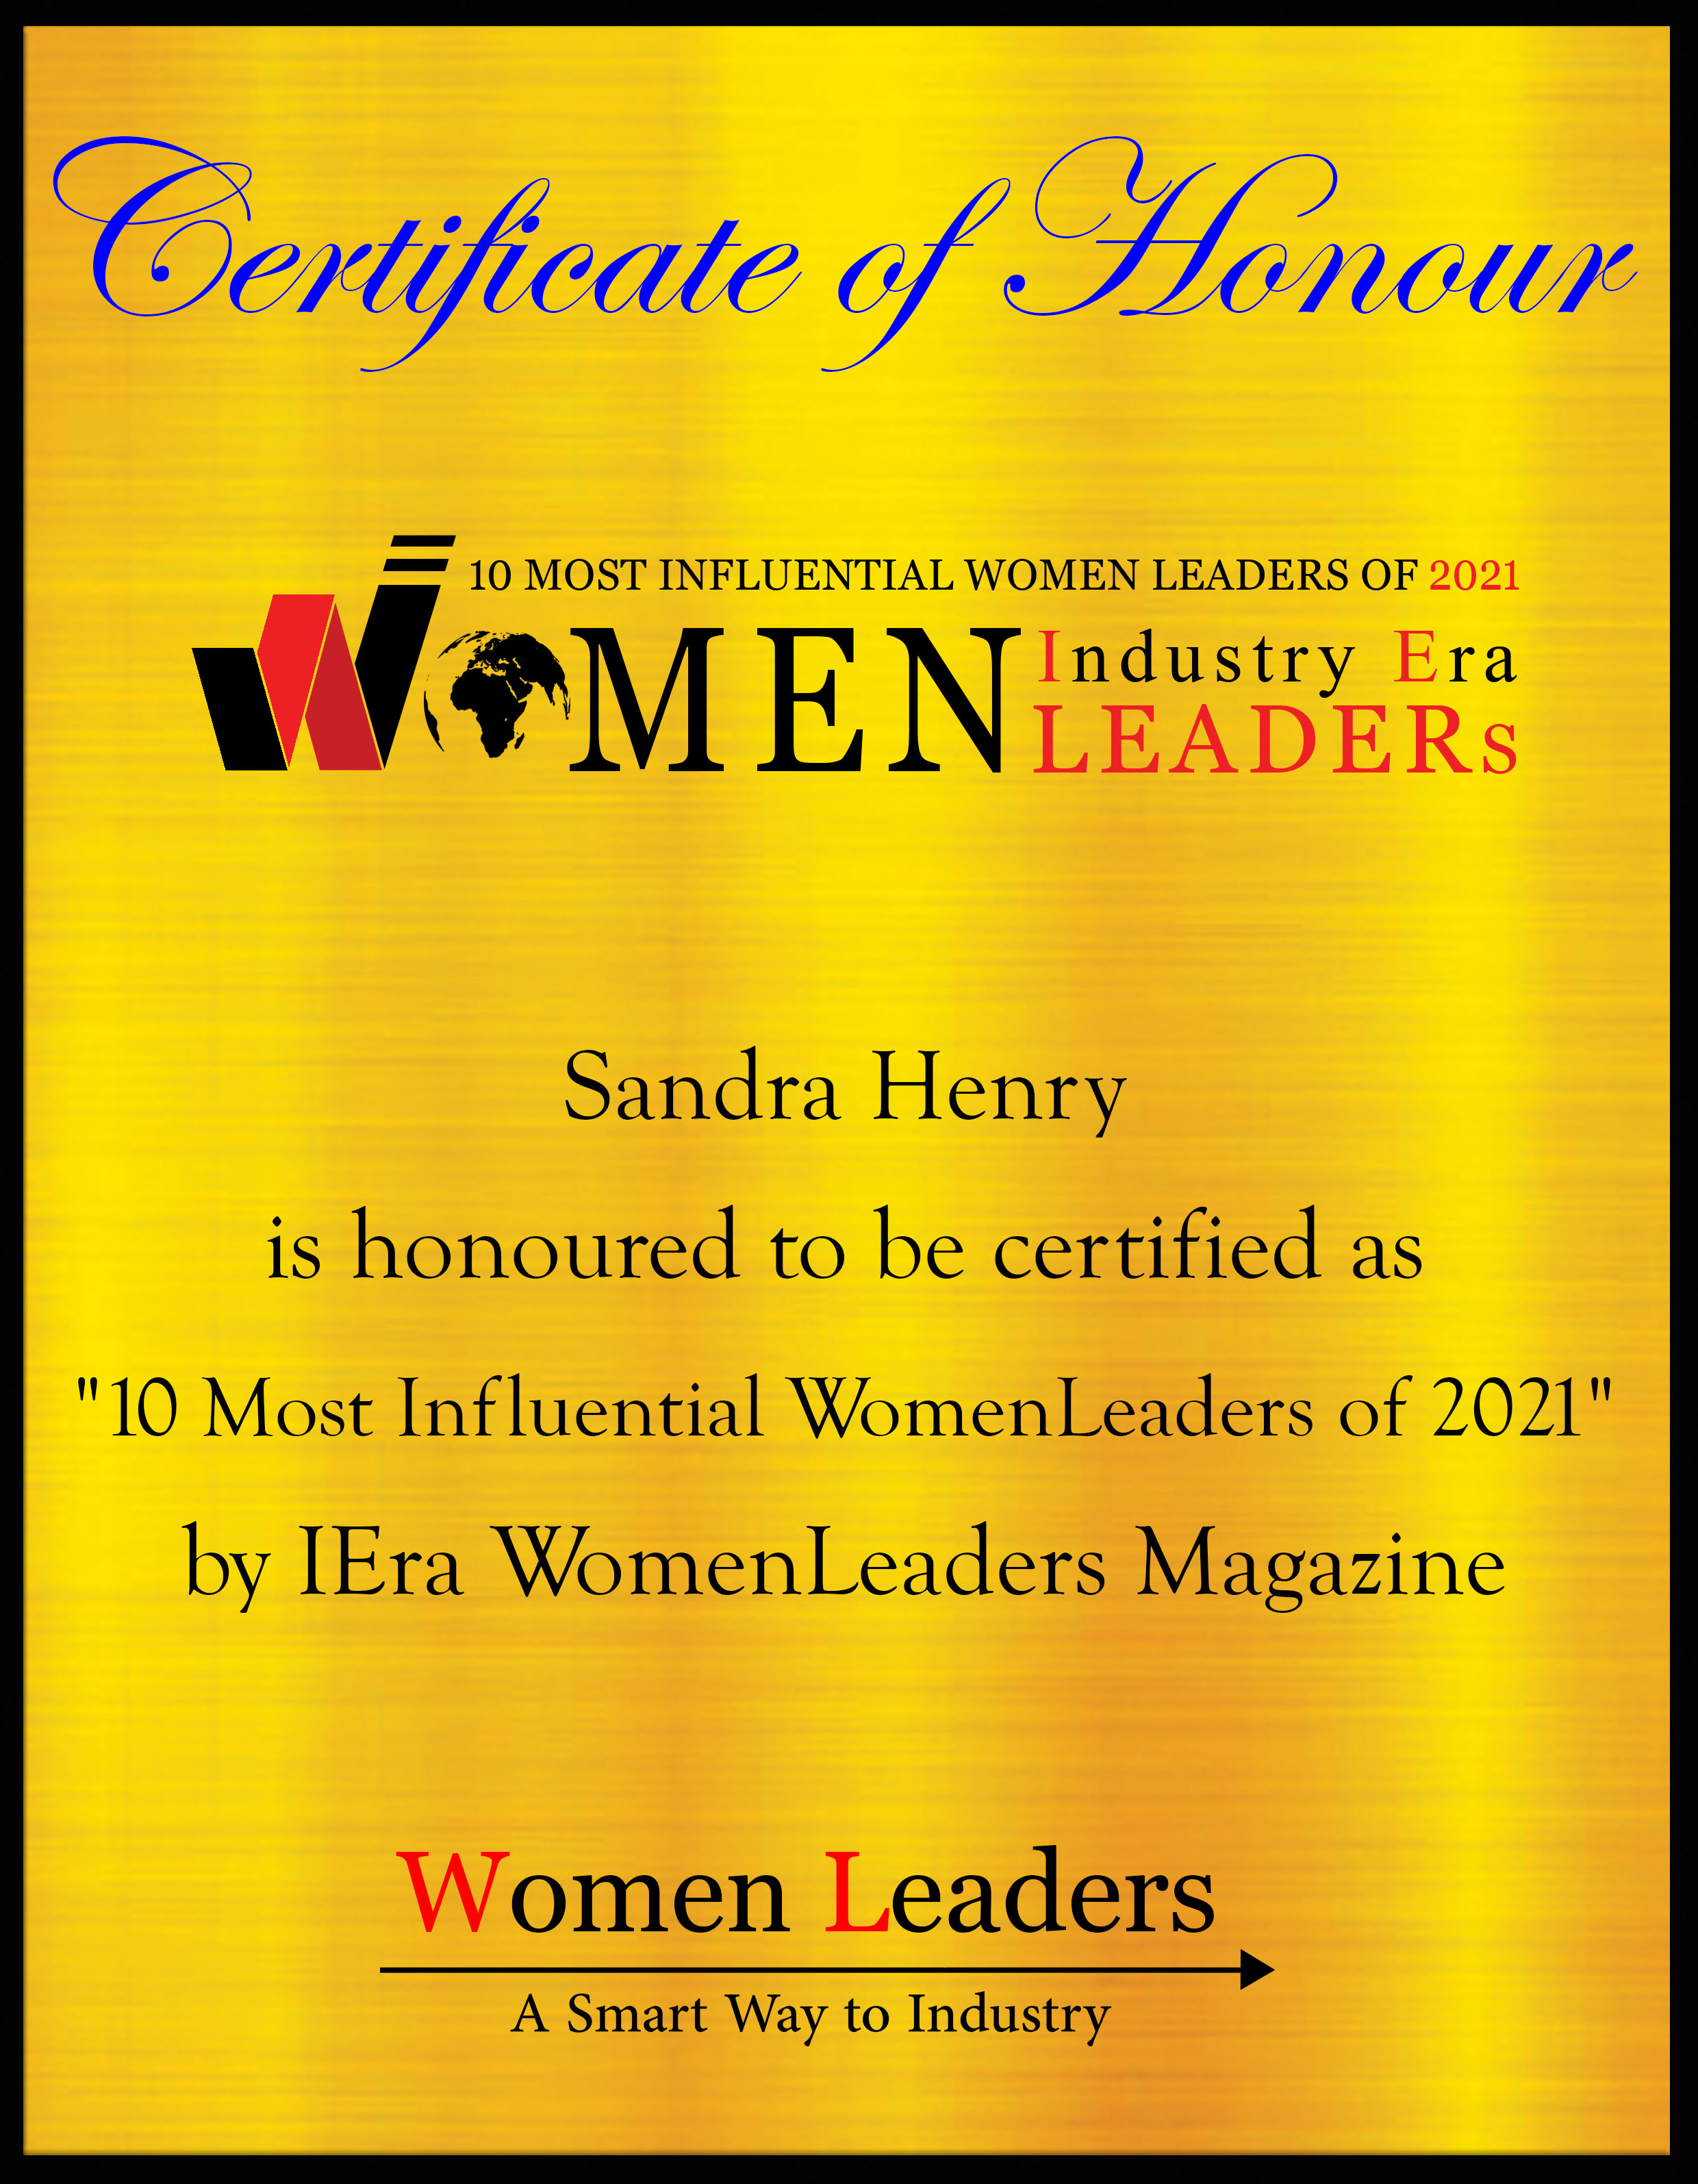 Sandra Henry, Senior Director, Energy and Sustainability at Elevate, Most Influential WomenLeaders of 2021